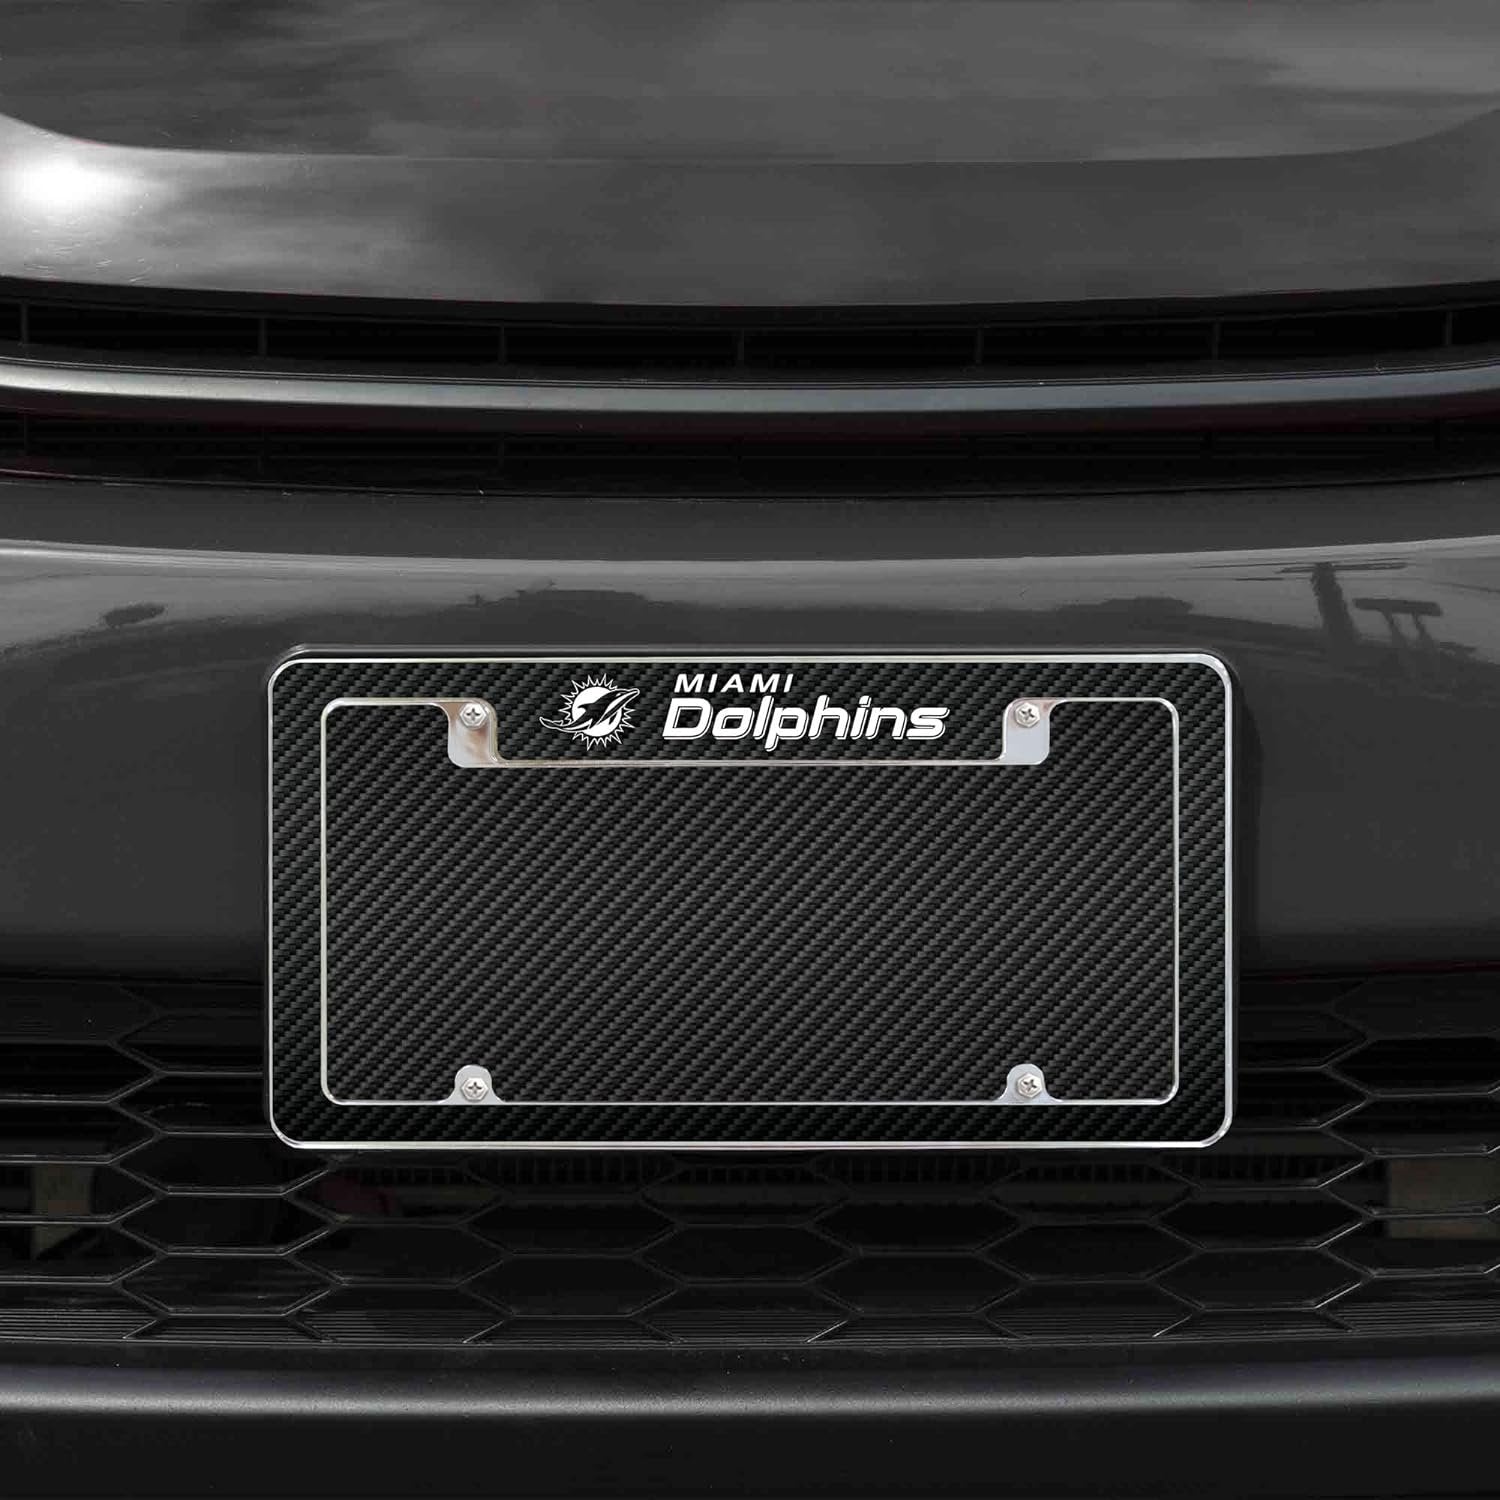 Miami Dolphins Metal License Plate Frame Chrome Tag Cover, 12x6 Inch